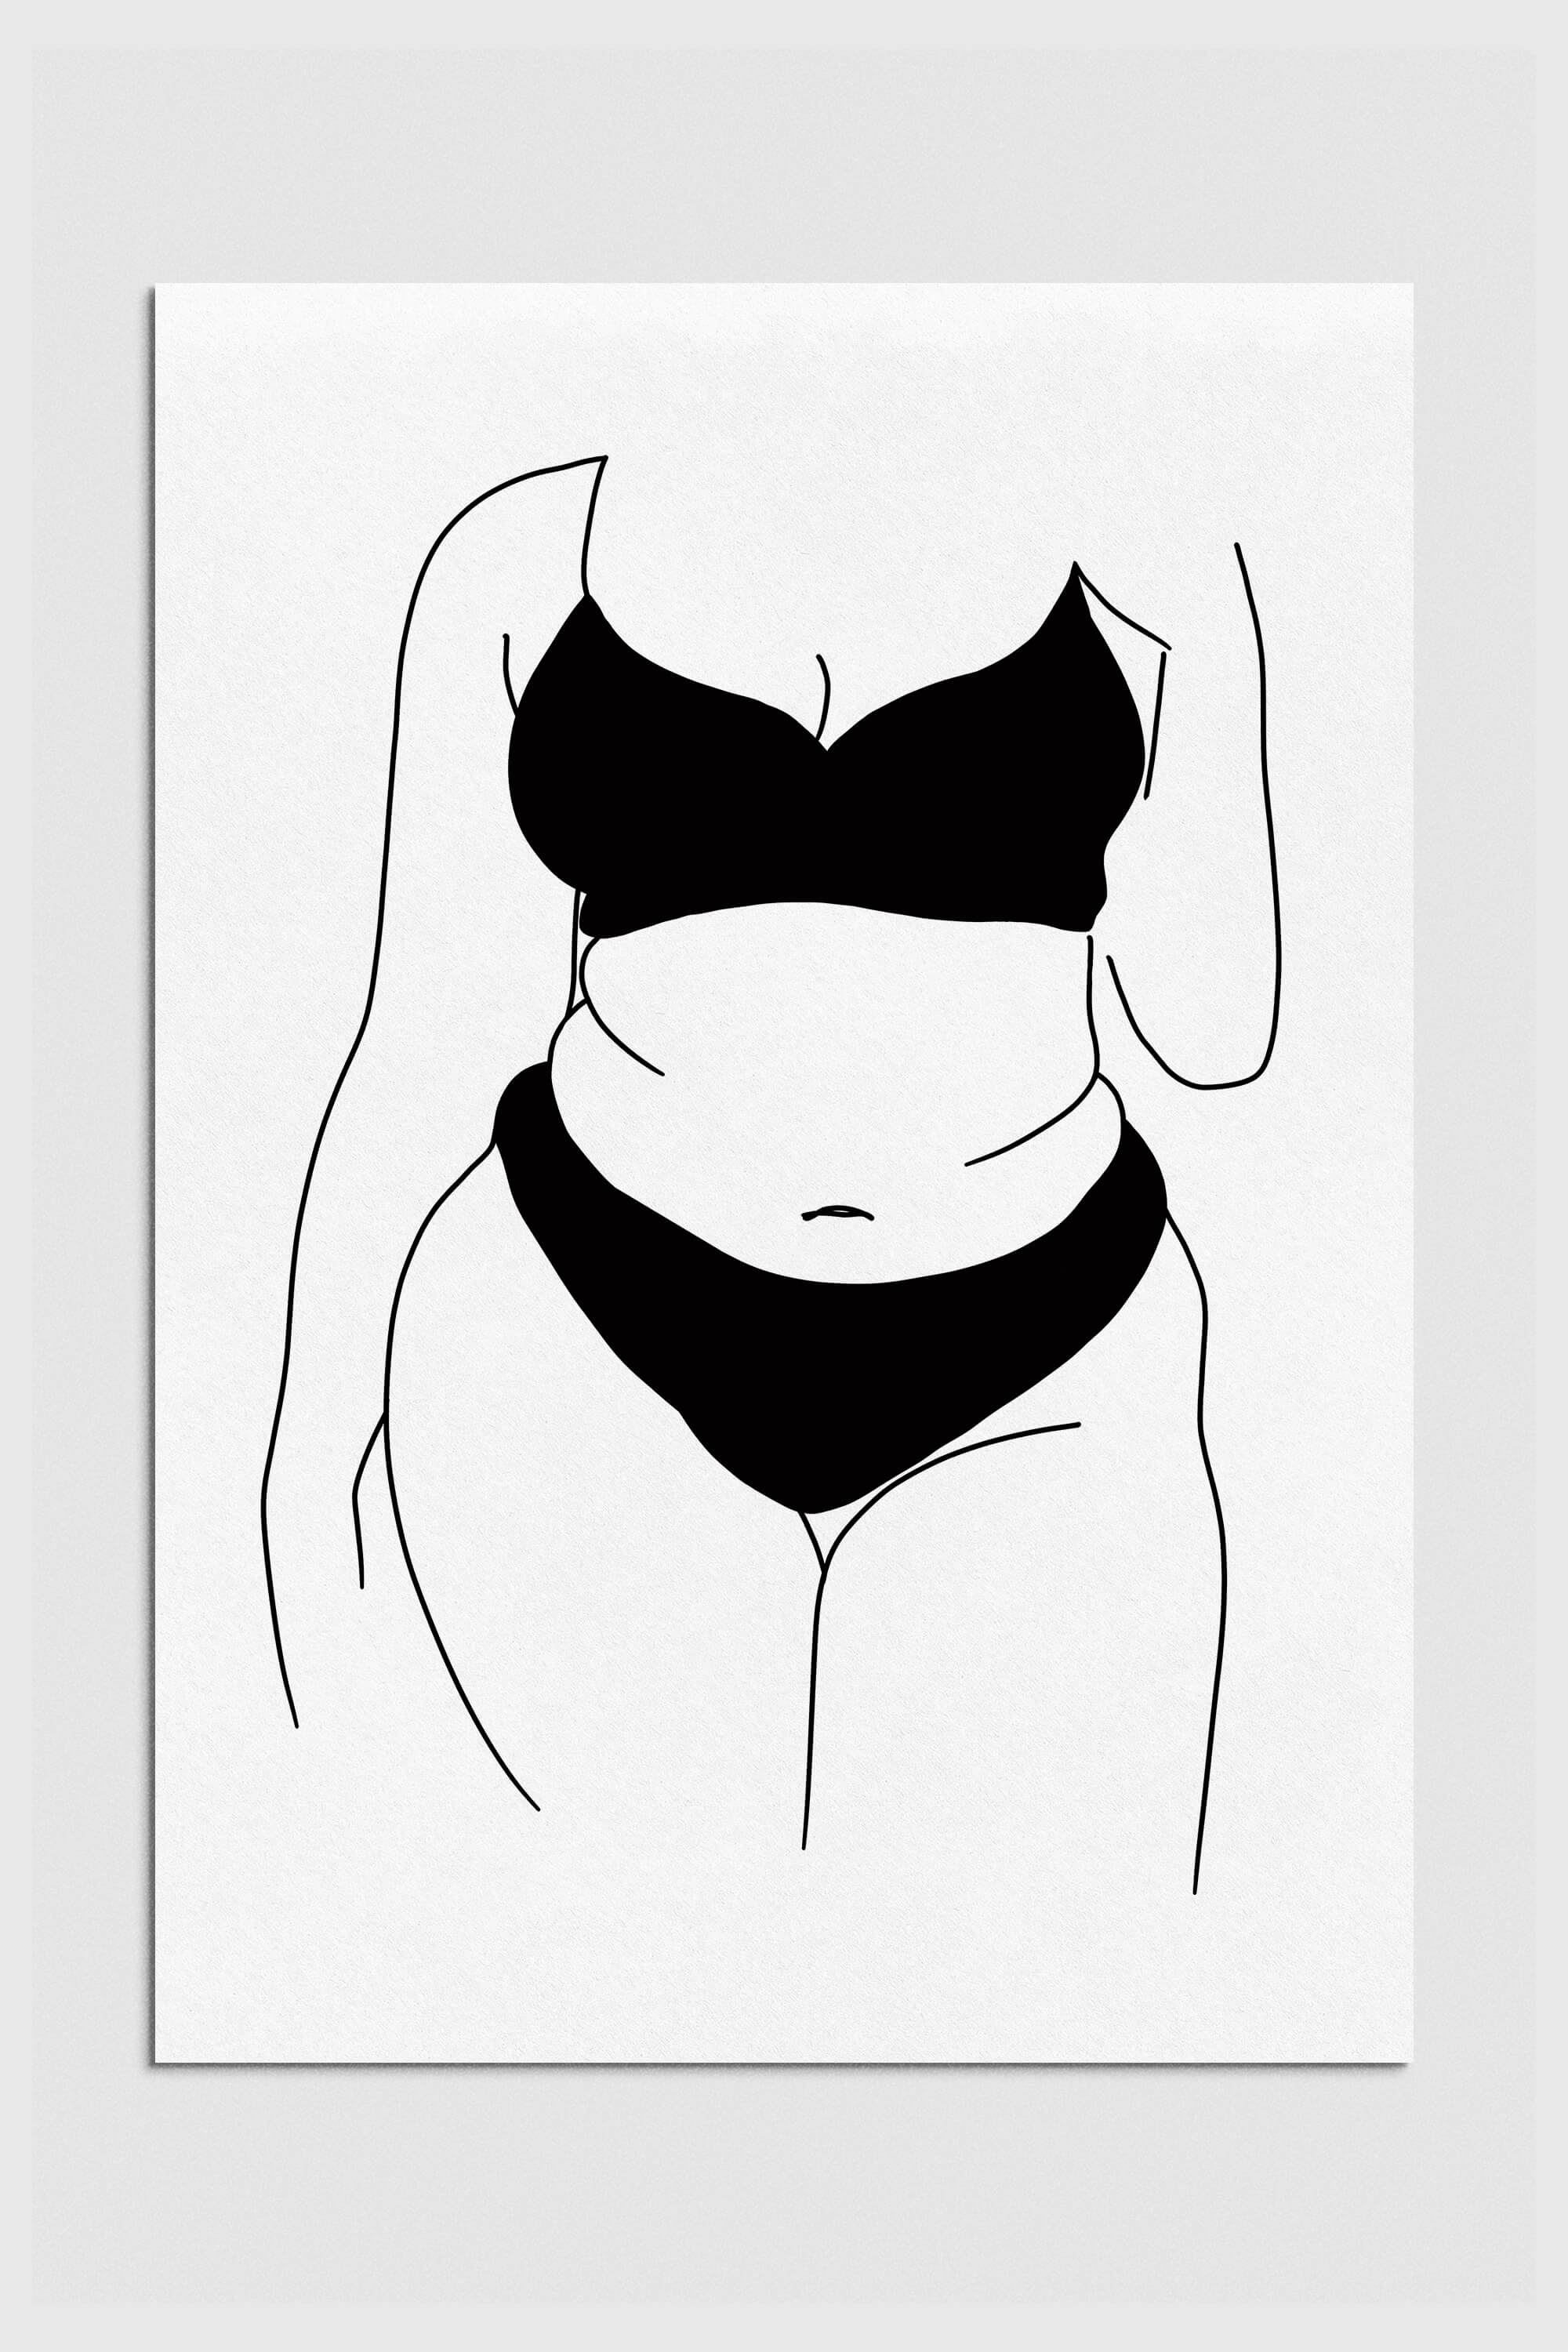 A captivating black and white line art print celebrating curvy confidence. Bold lines and delicate curves harmonize to convey strength and beauty.